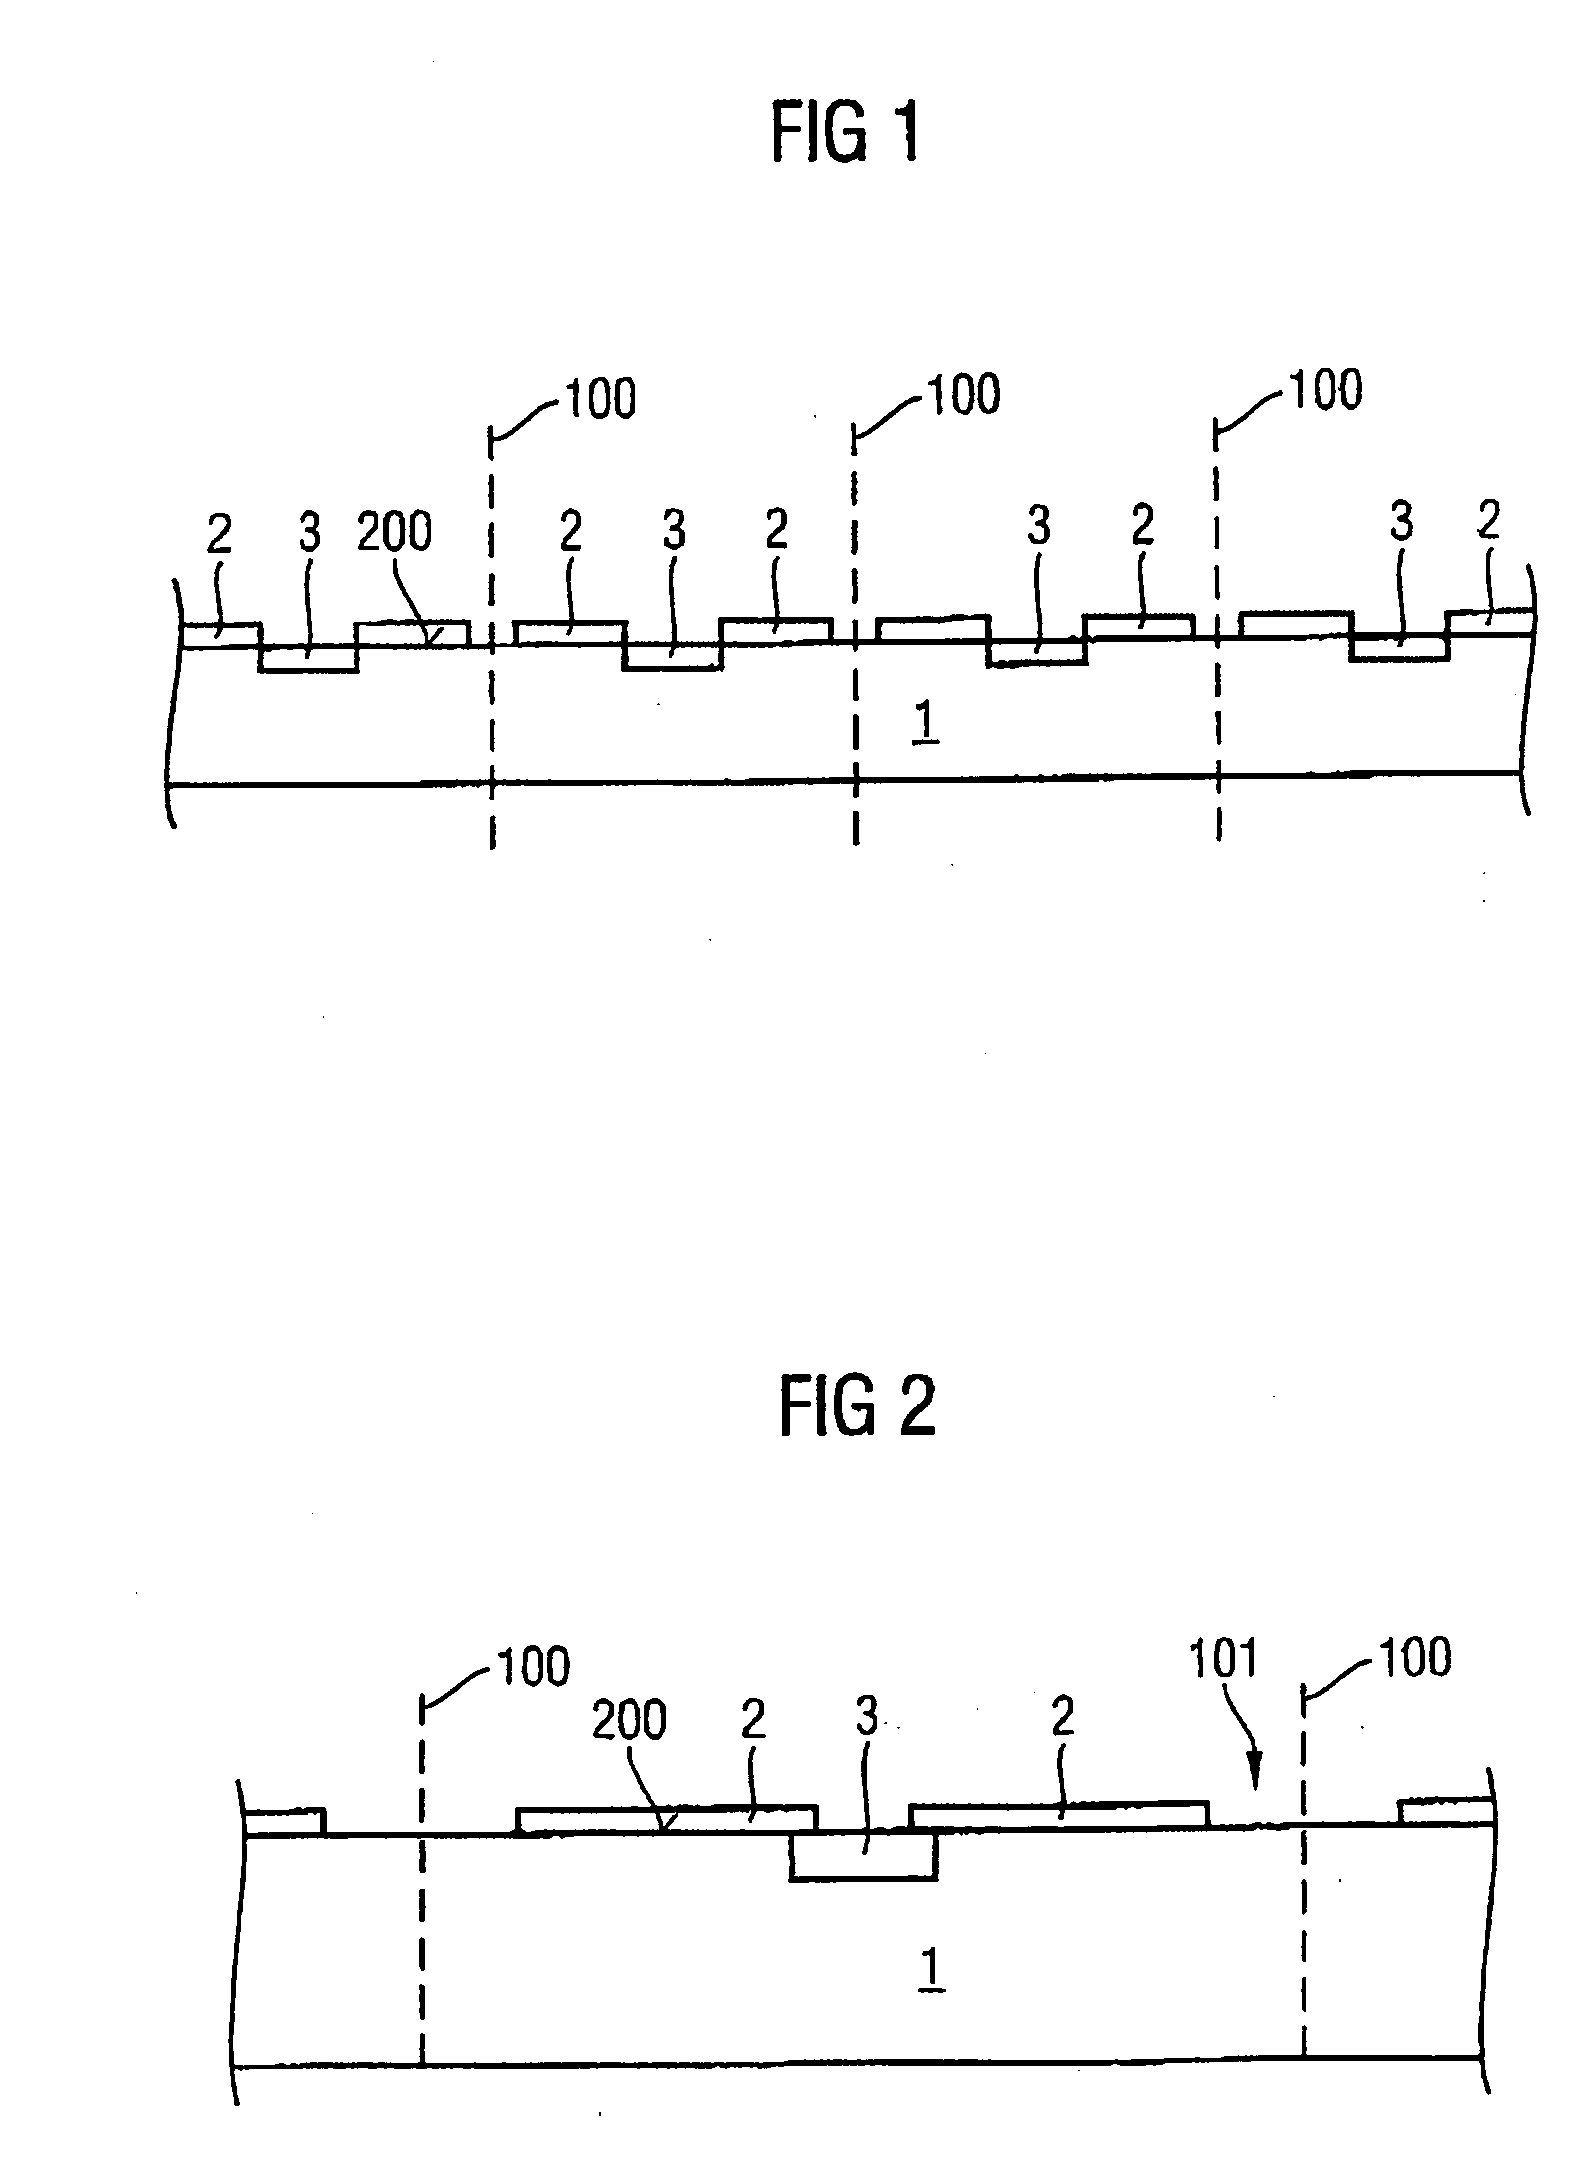 Method for fabricating semiconductor components